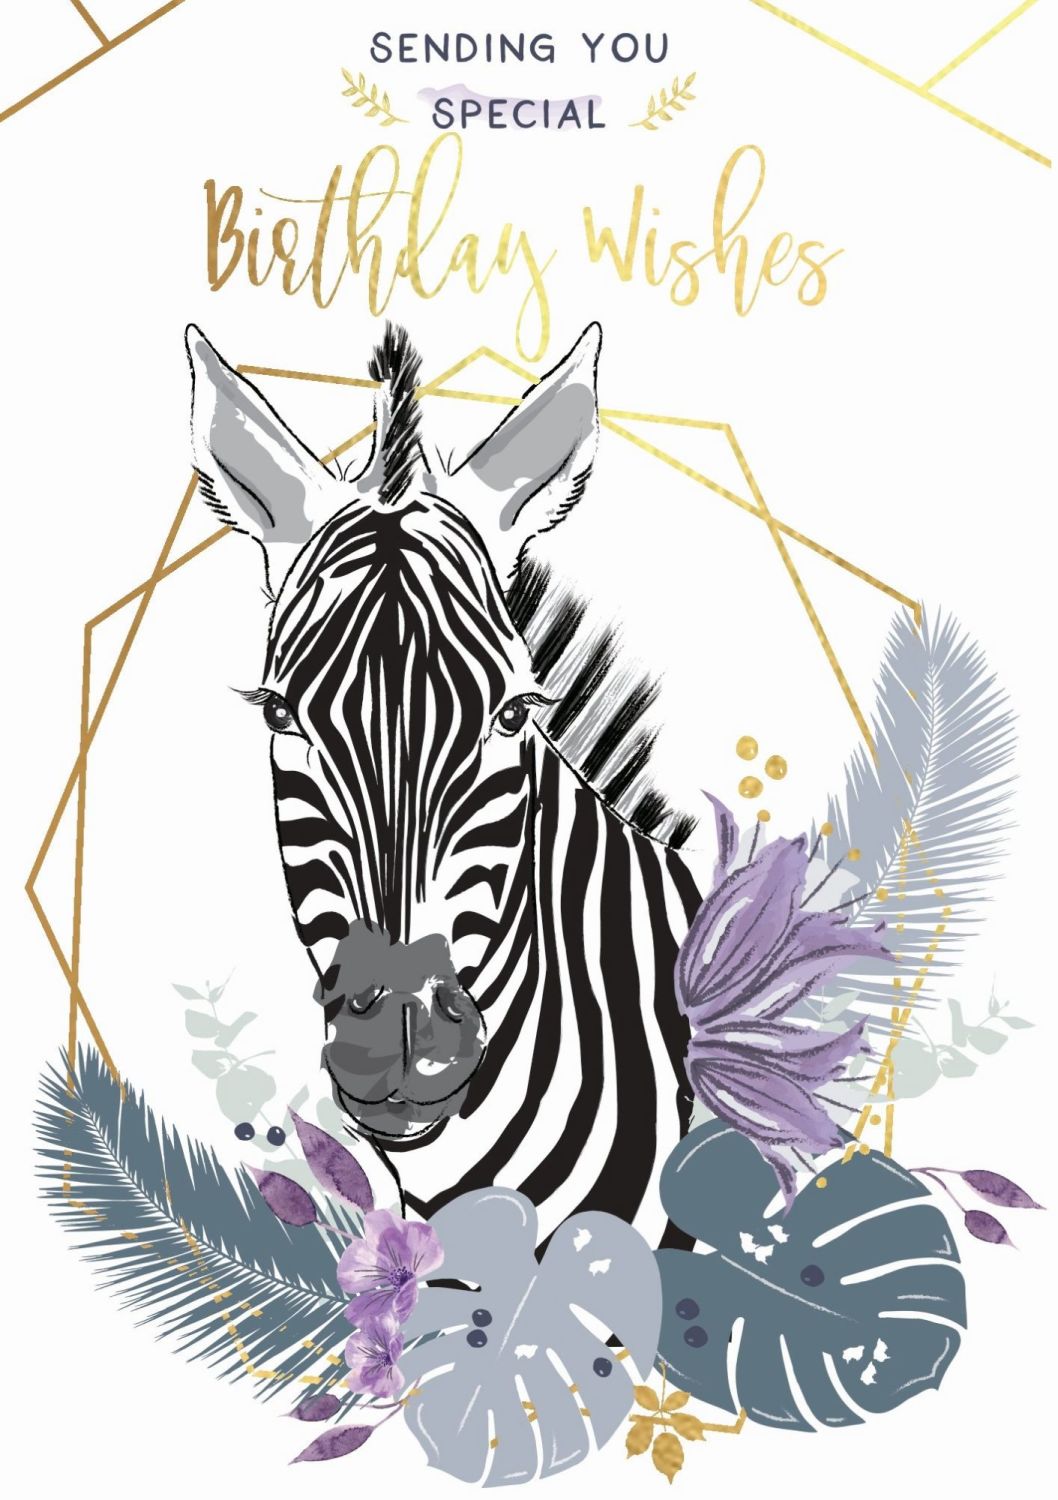 Birthday Wishes Greeting Card - SENDING You SPECIAL Birthday WISHES - Birth